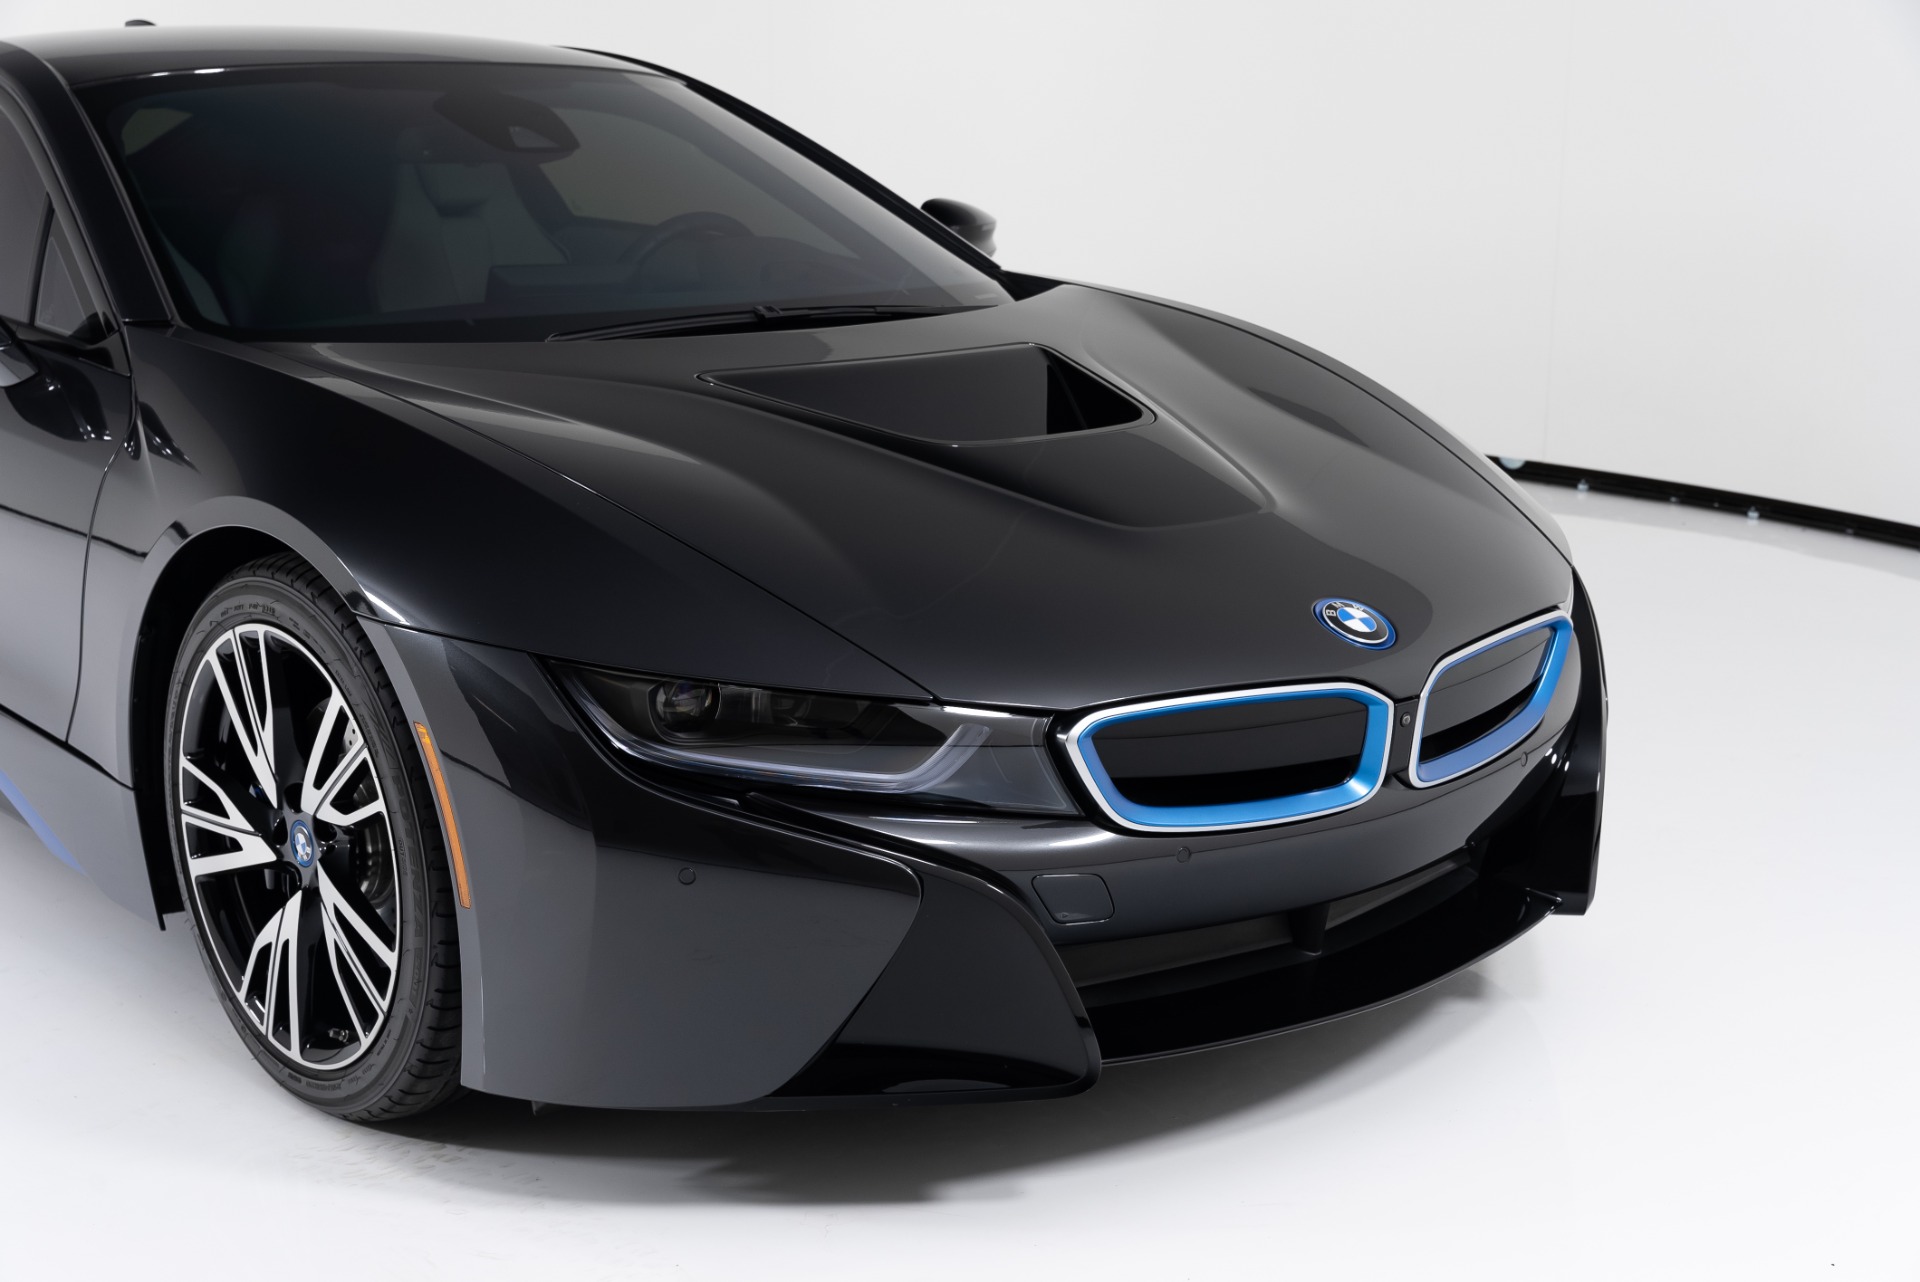 Used 2015 BMW I8 For Sale (Sold)